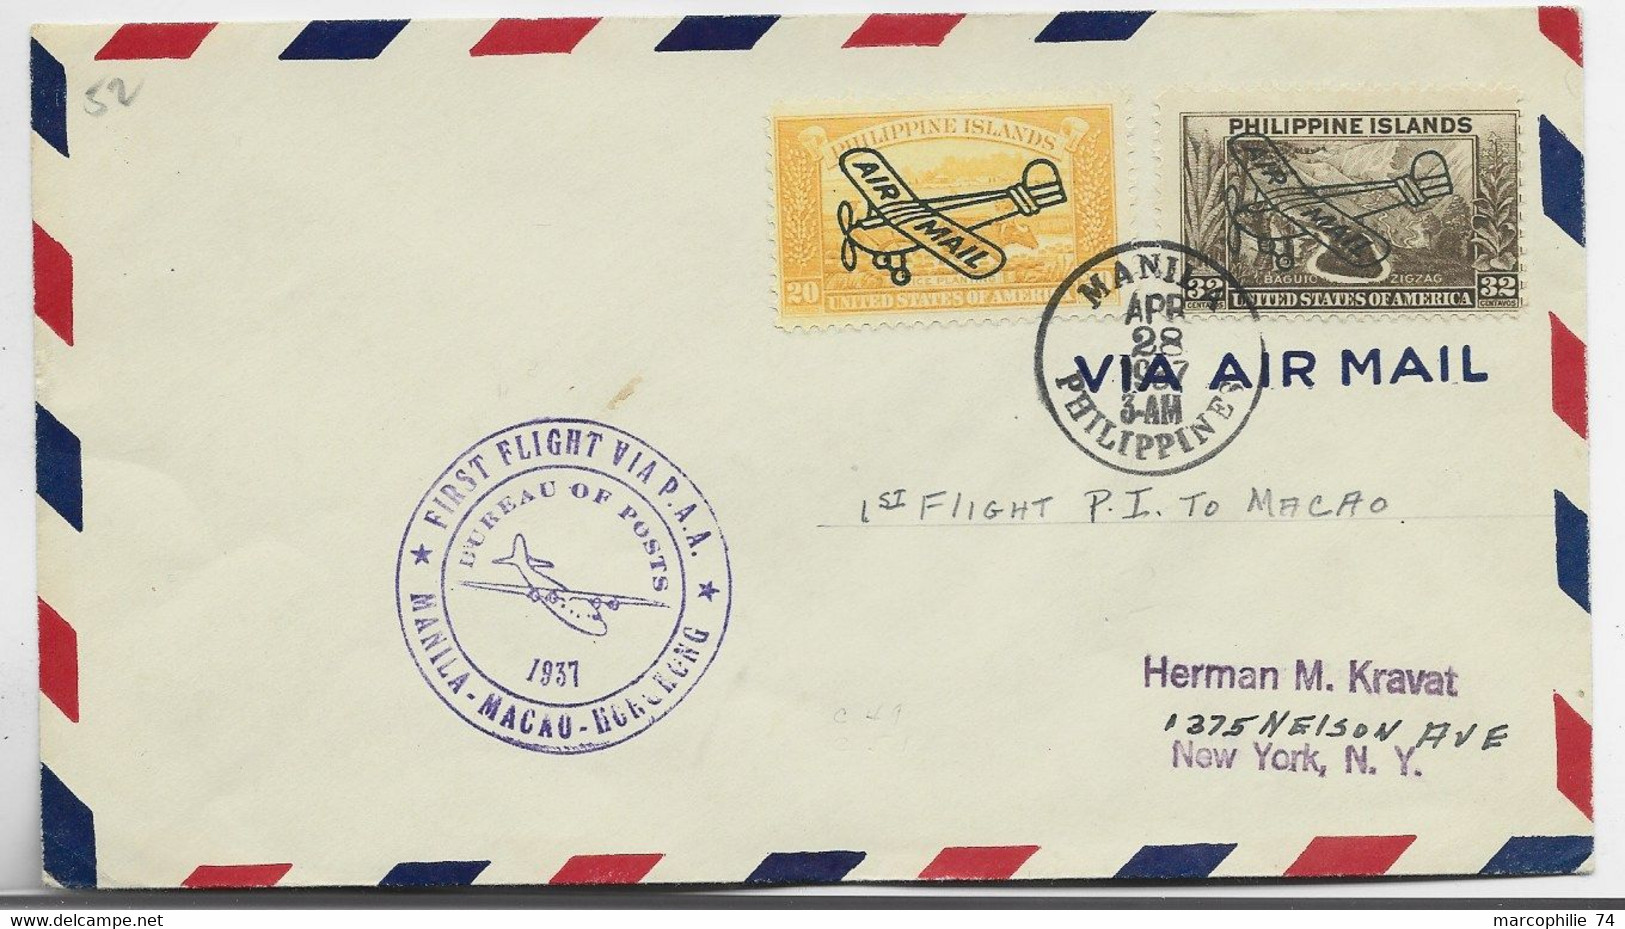 PHILIPPINE ISLANDS MANILLA LETTRE COVER AIR MAIL FIRST FLIGHT ASIA GUAM MACAO APR 28 1937 TO USA - Poste Aérienne